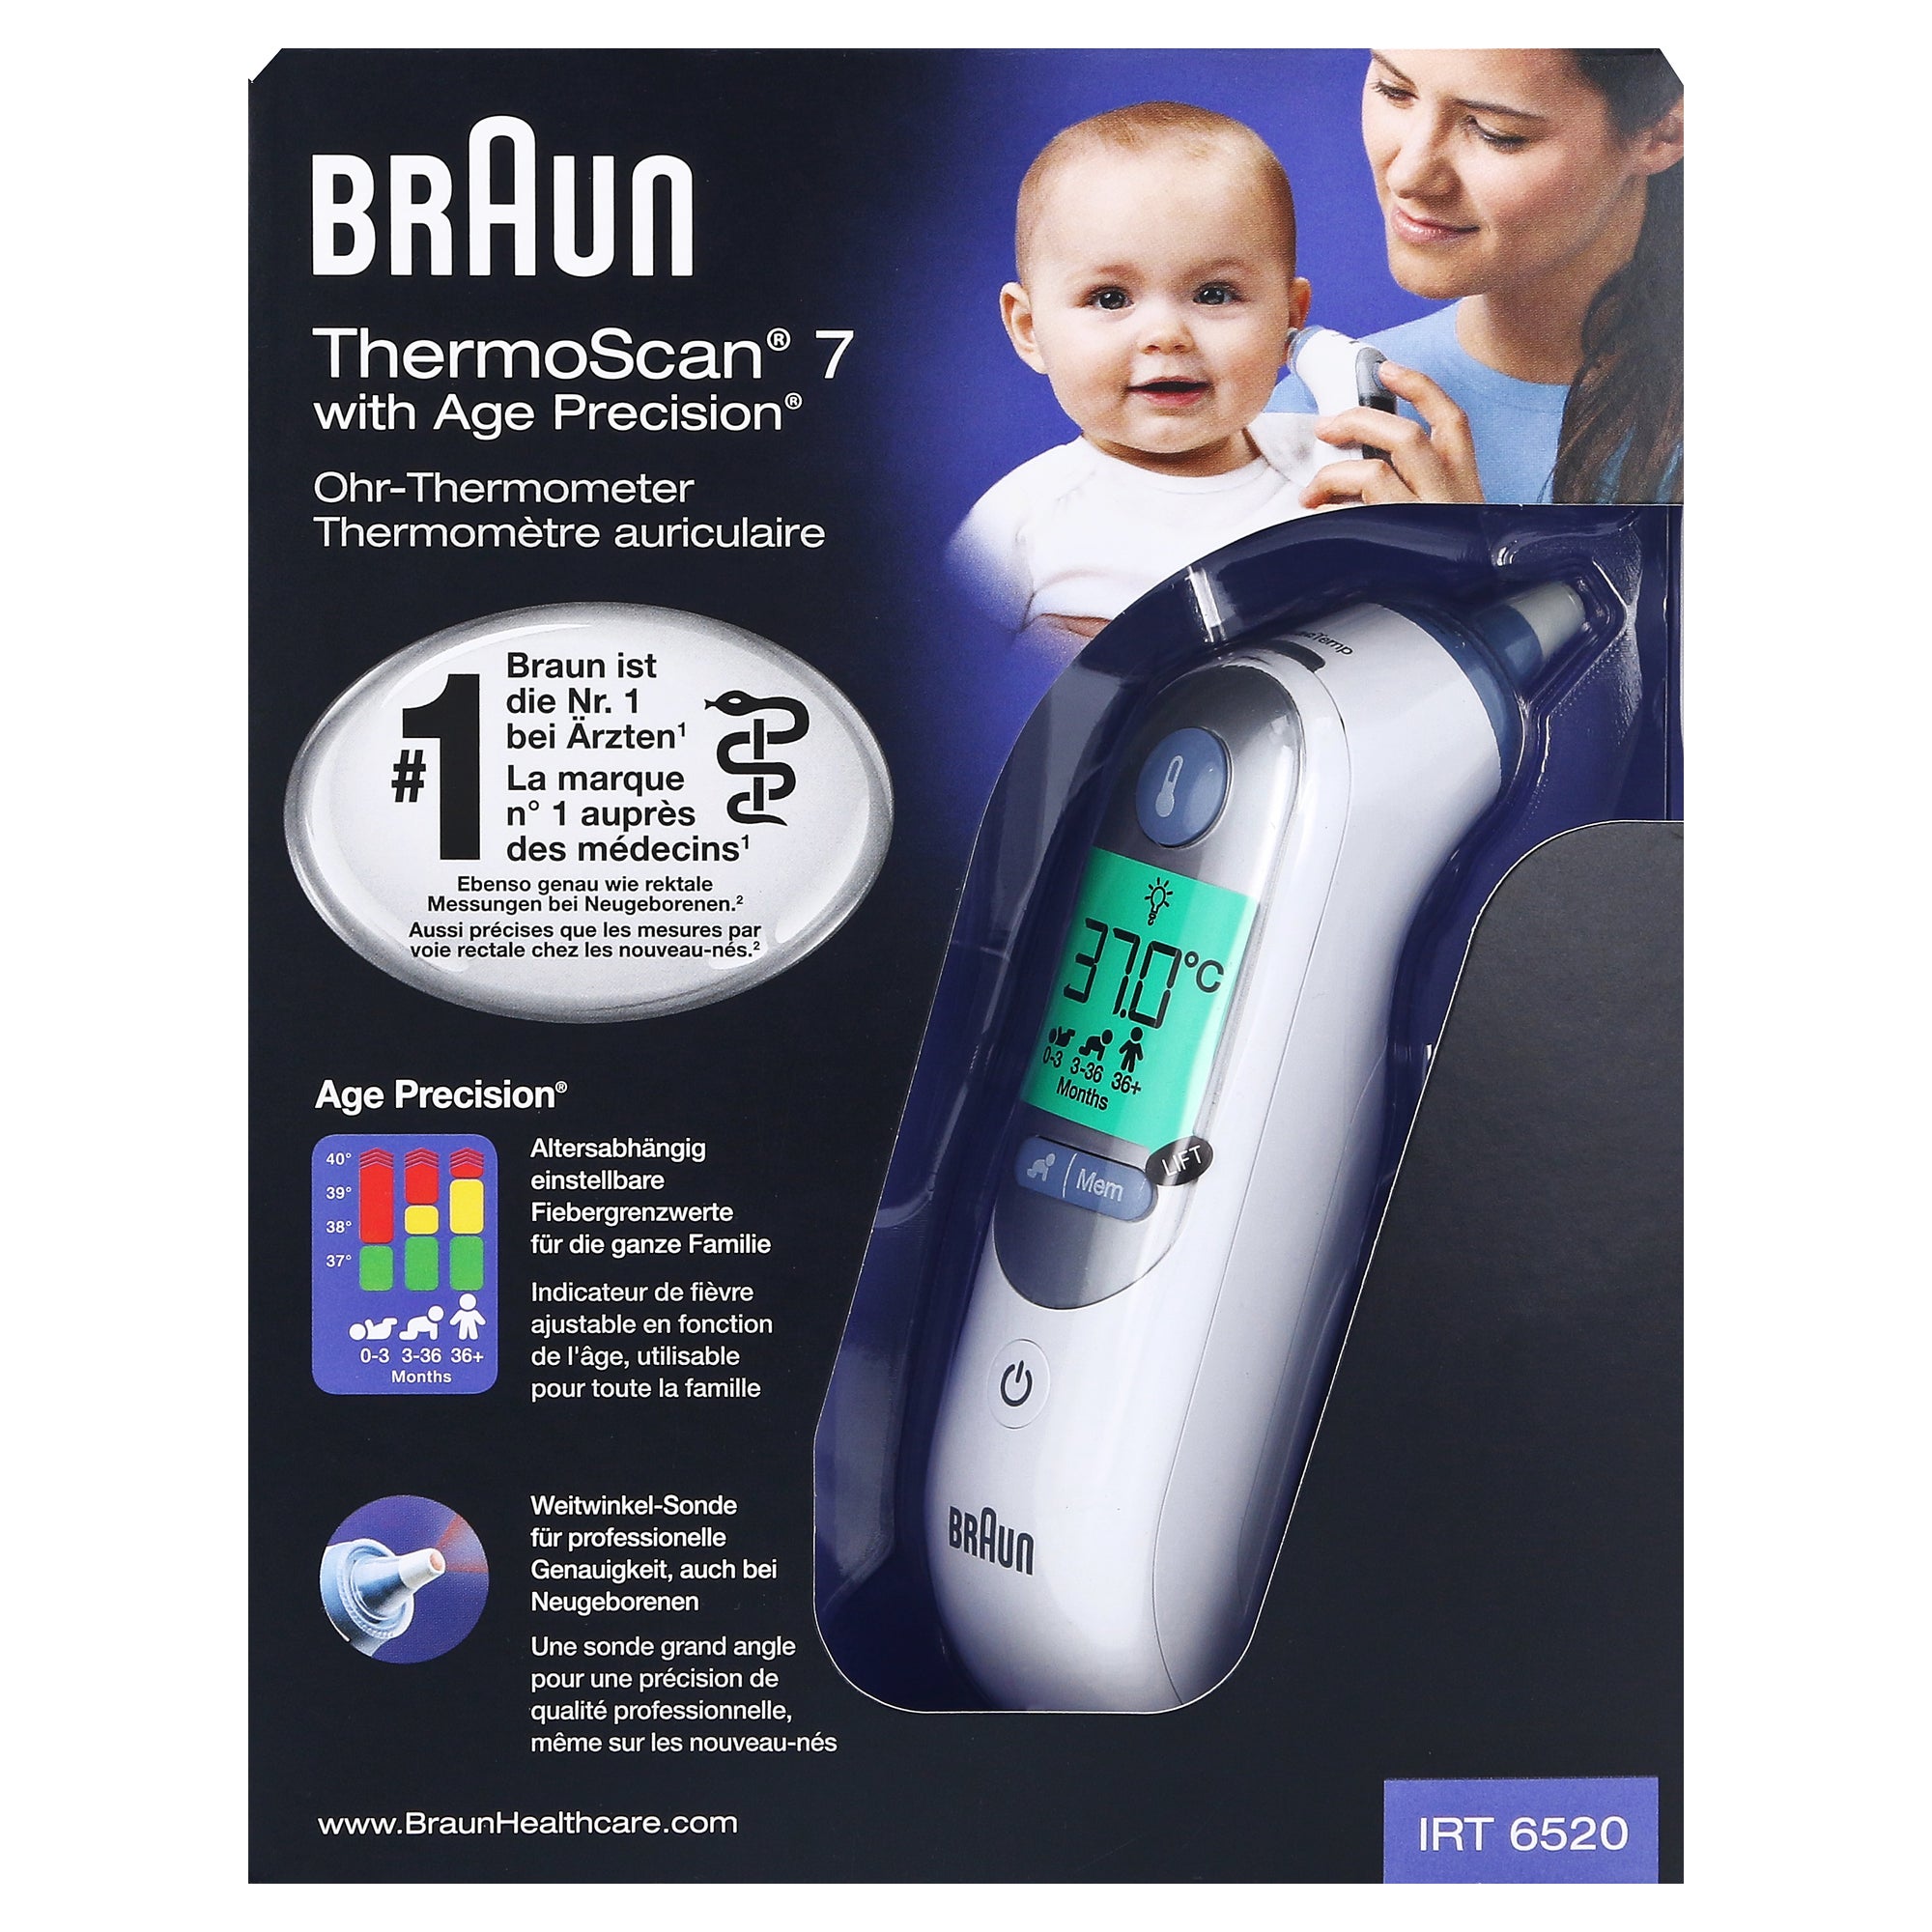 DocMorris St. 7 1 Ohrthermometer, | kaufen Irt6520 online Thermoscan